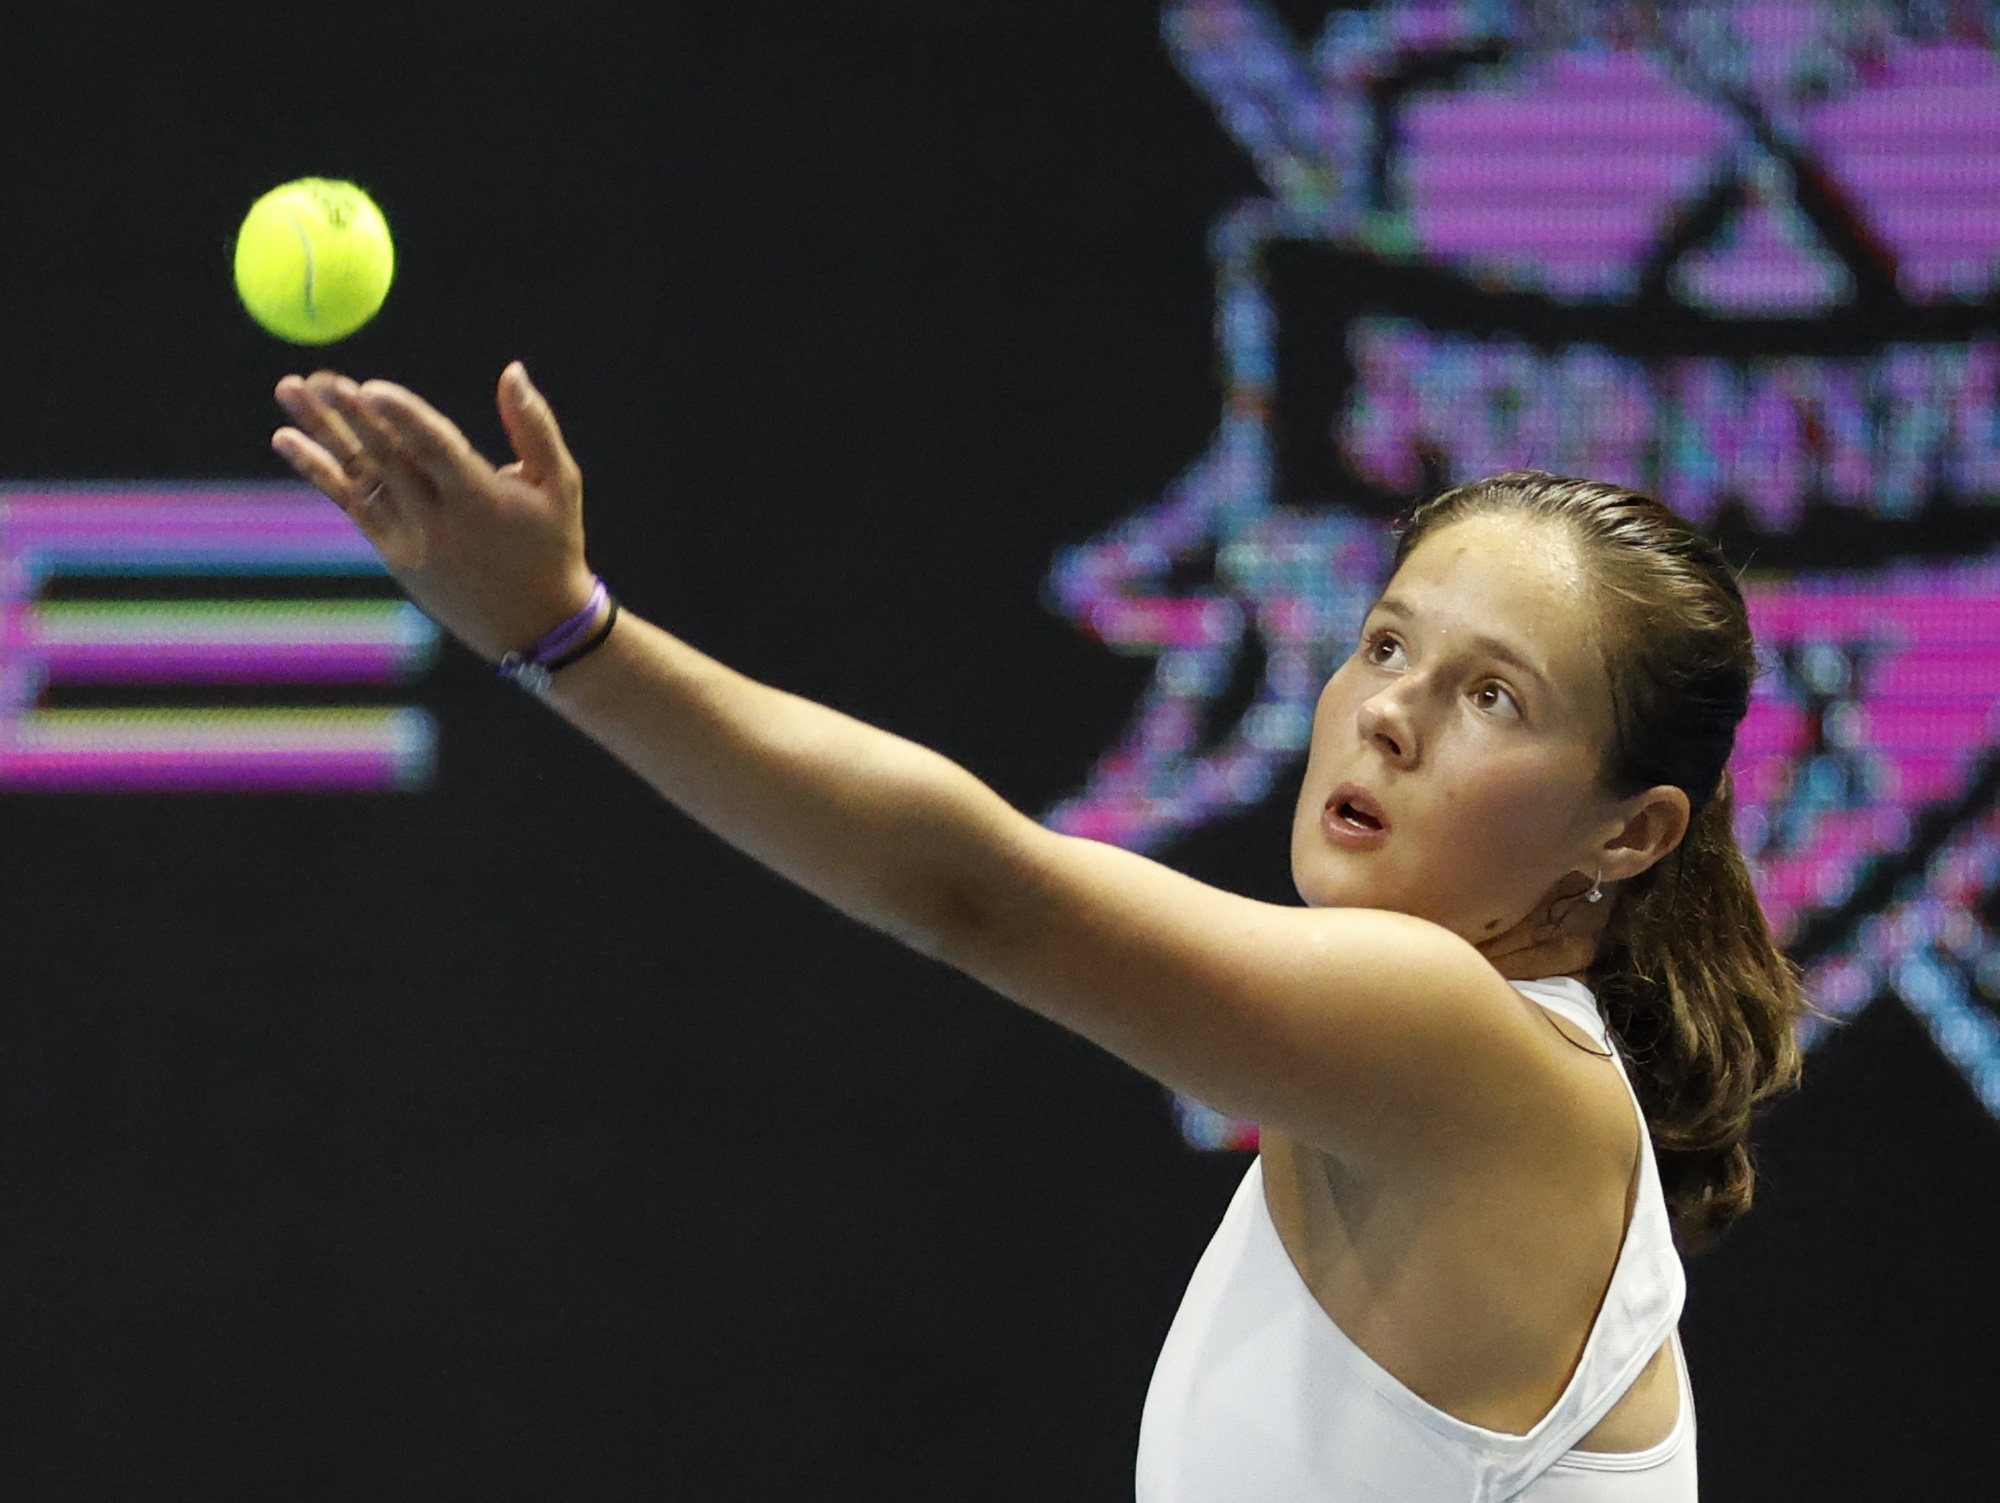 epa09085922 Daria Kasatkina of Russia in action against Svetlana Kuznetsova of Russia during their semi final match of the St. Petersburg Ladies Trophy 2021 WTA tennis tournament in St.Petersburg, Russia, 20 March 2021  EPA/ANATOLY MALTSEV